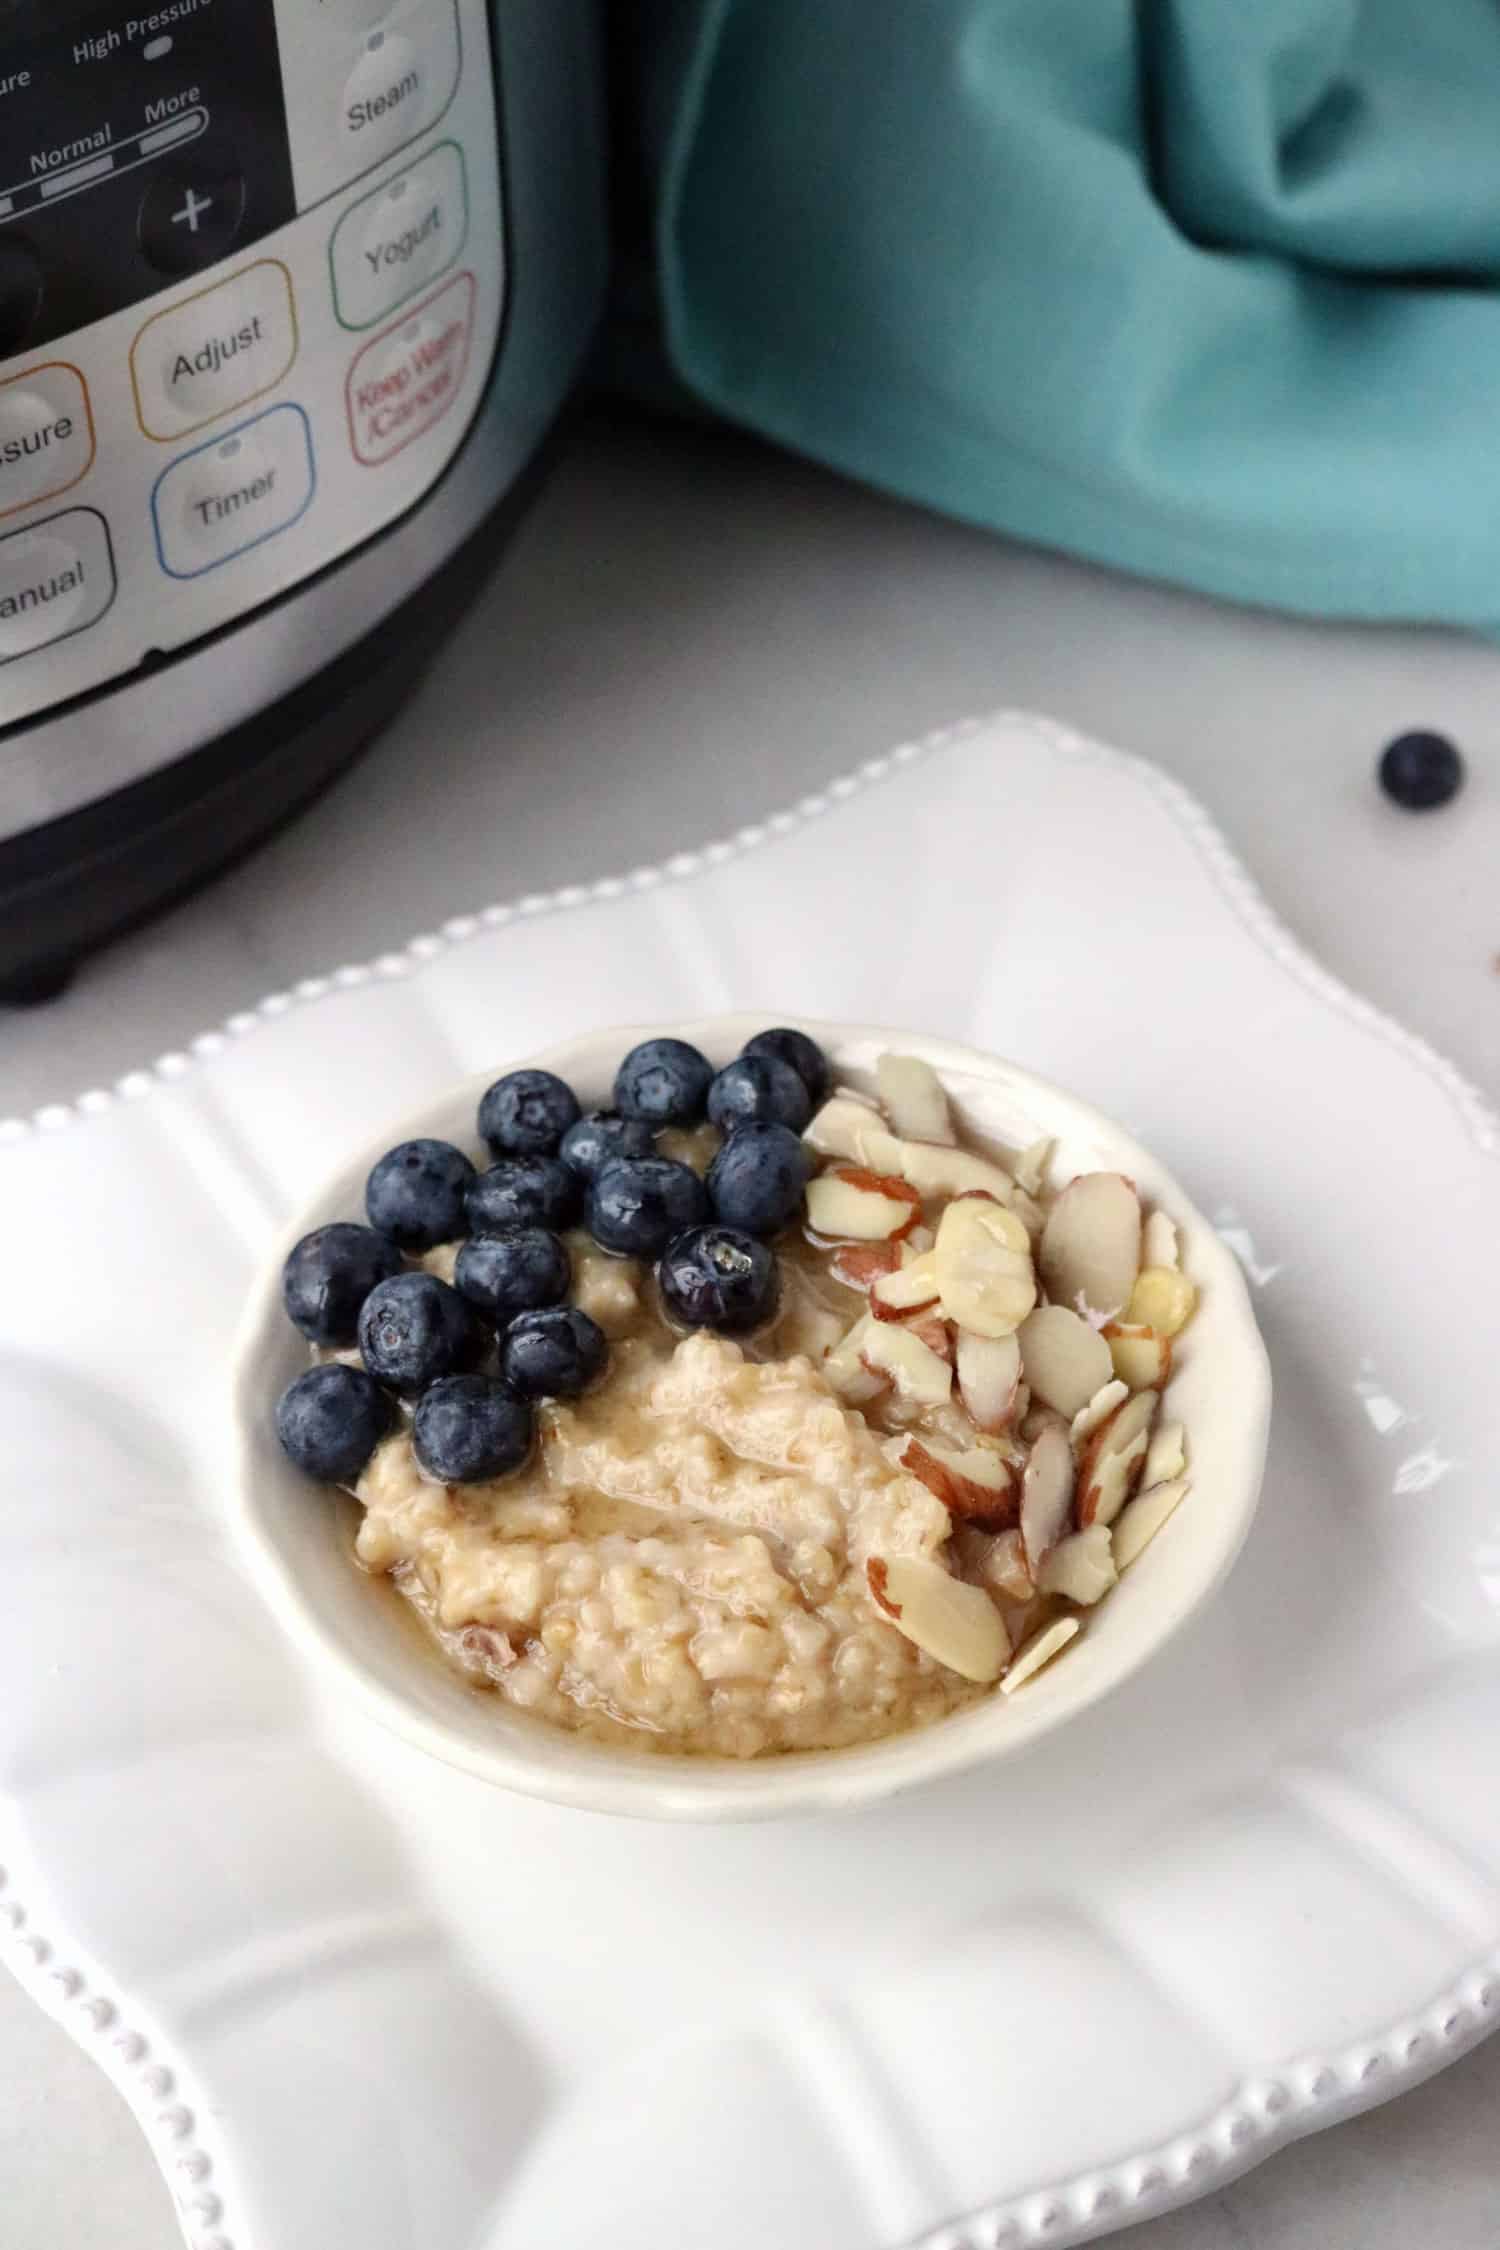 Instant Pot steel cut oats topped with blueberries, almonds and honey served in a white bowl on a square white plate